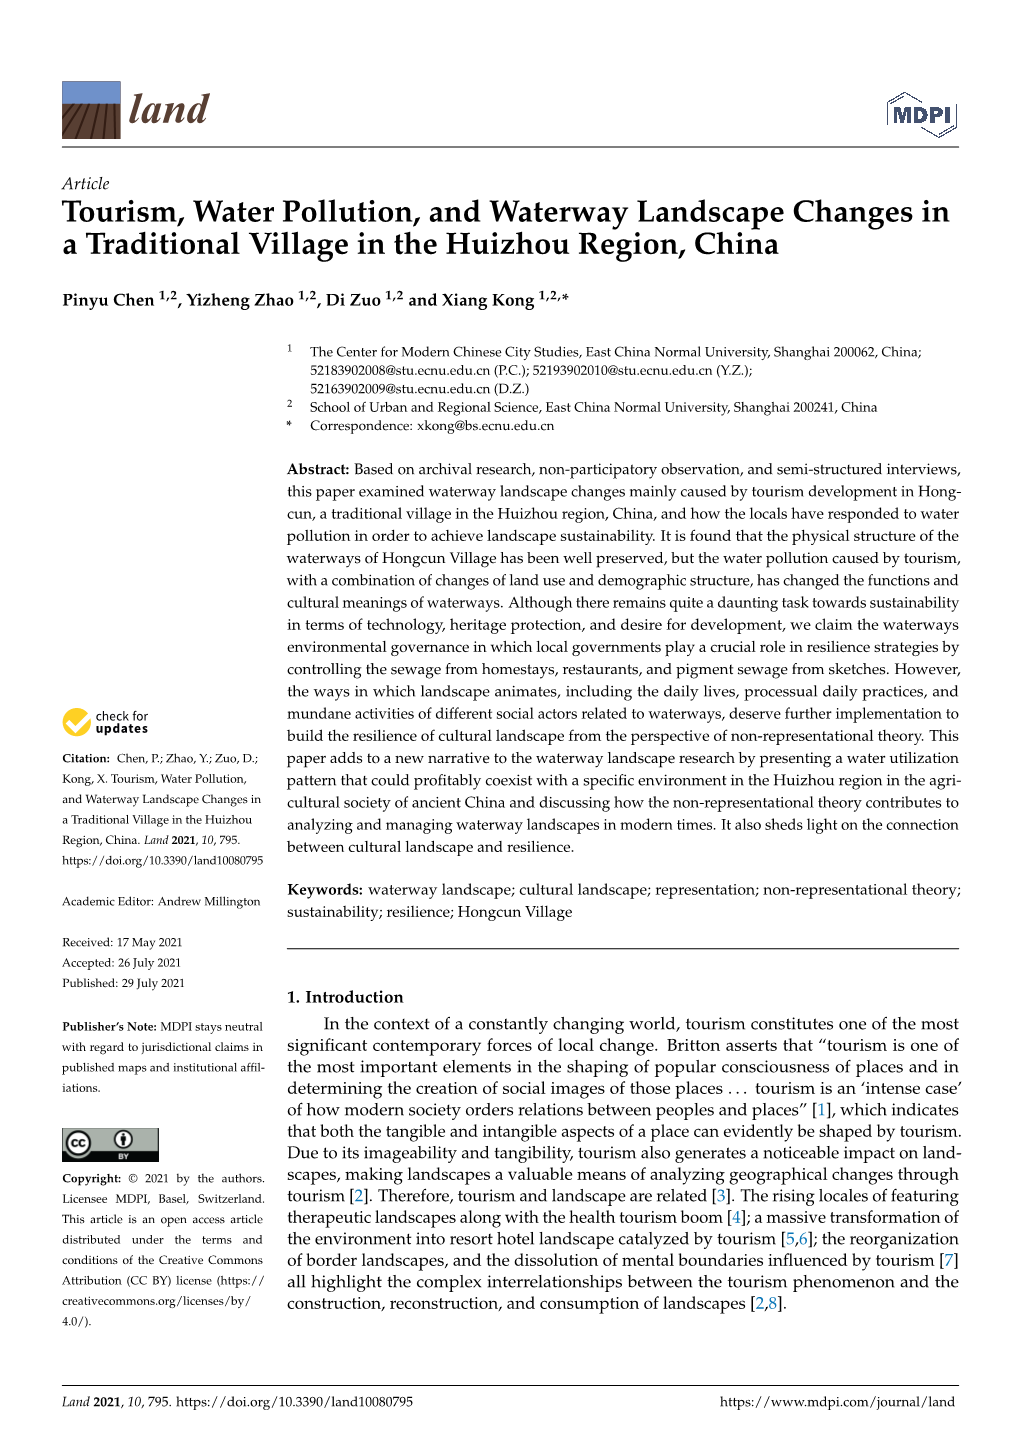 Tourism, Water Pollution, and Waterway Landscape Changes in a Traditional Village in the Huizhou Region, China